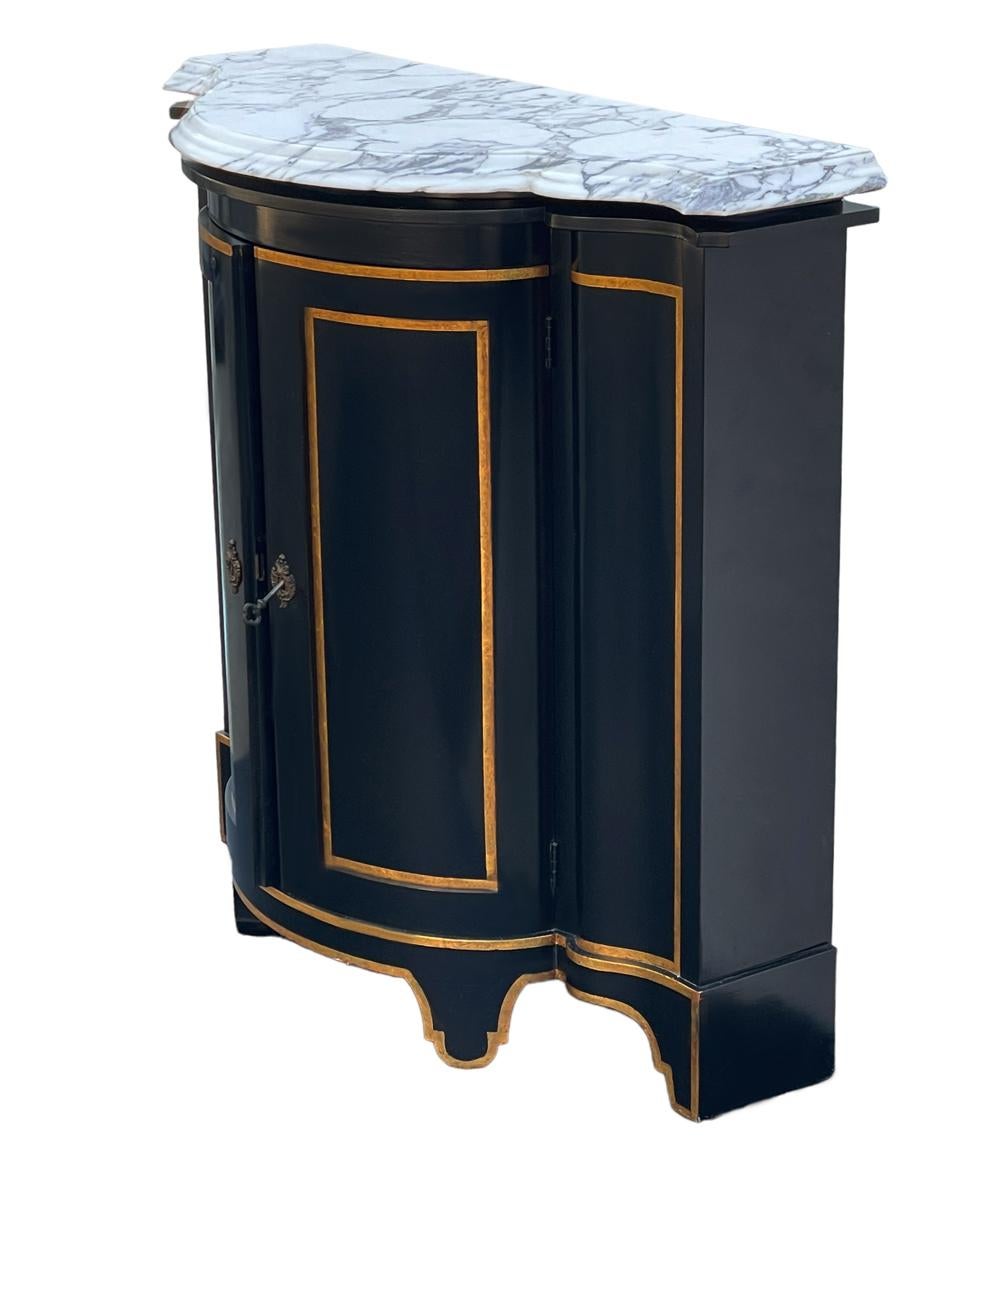 American Hollywood Regency Black, Gold & Marble Storage Cabinet or Credenza by Baker For Sale